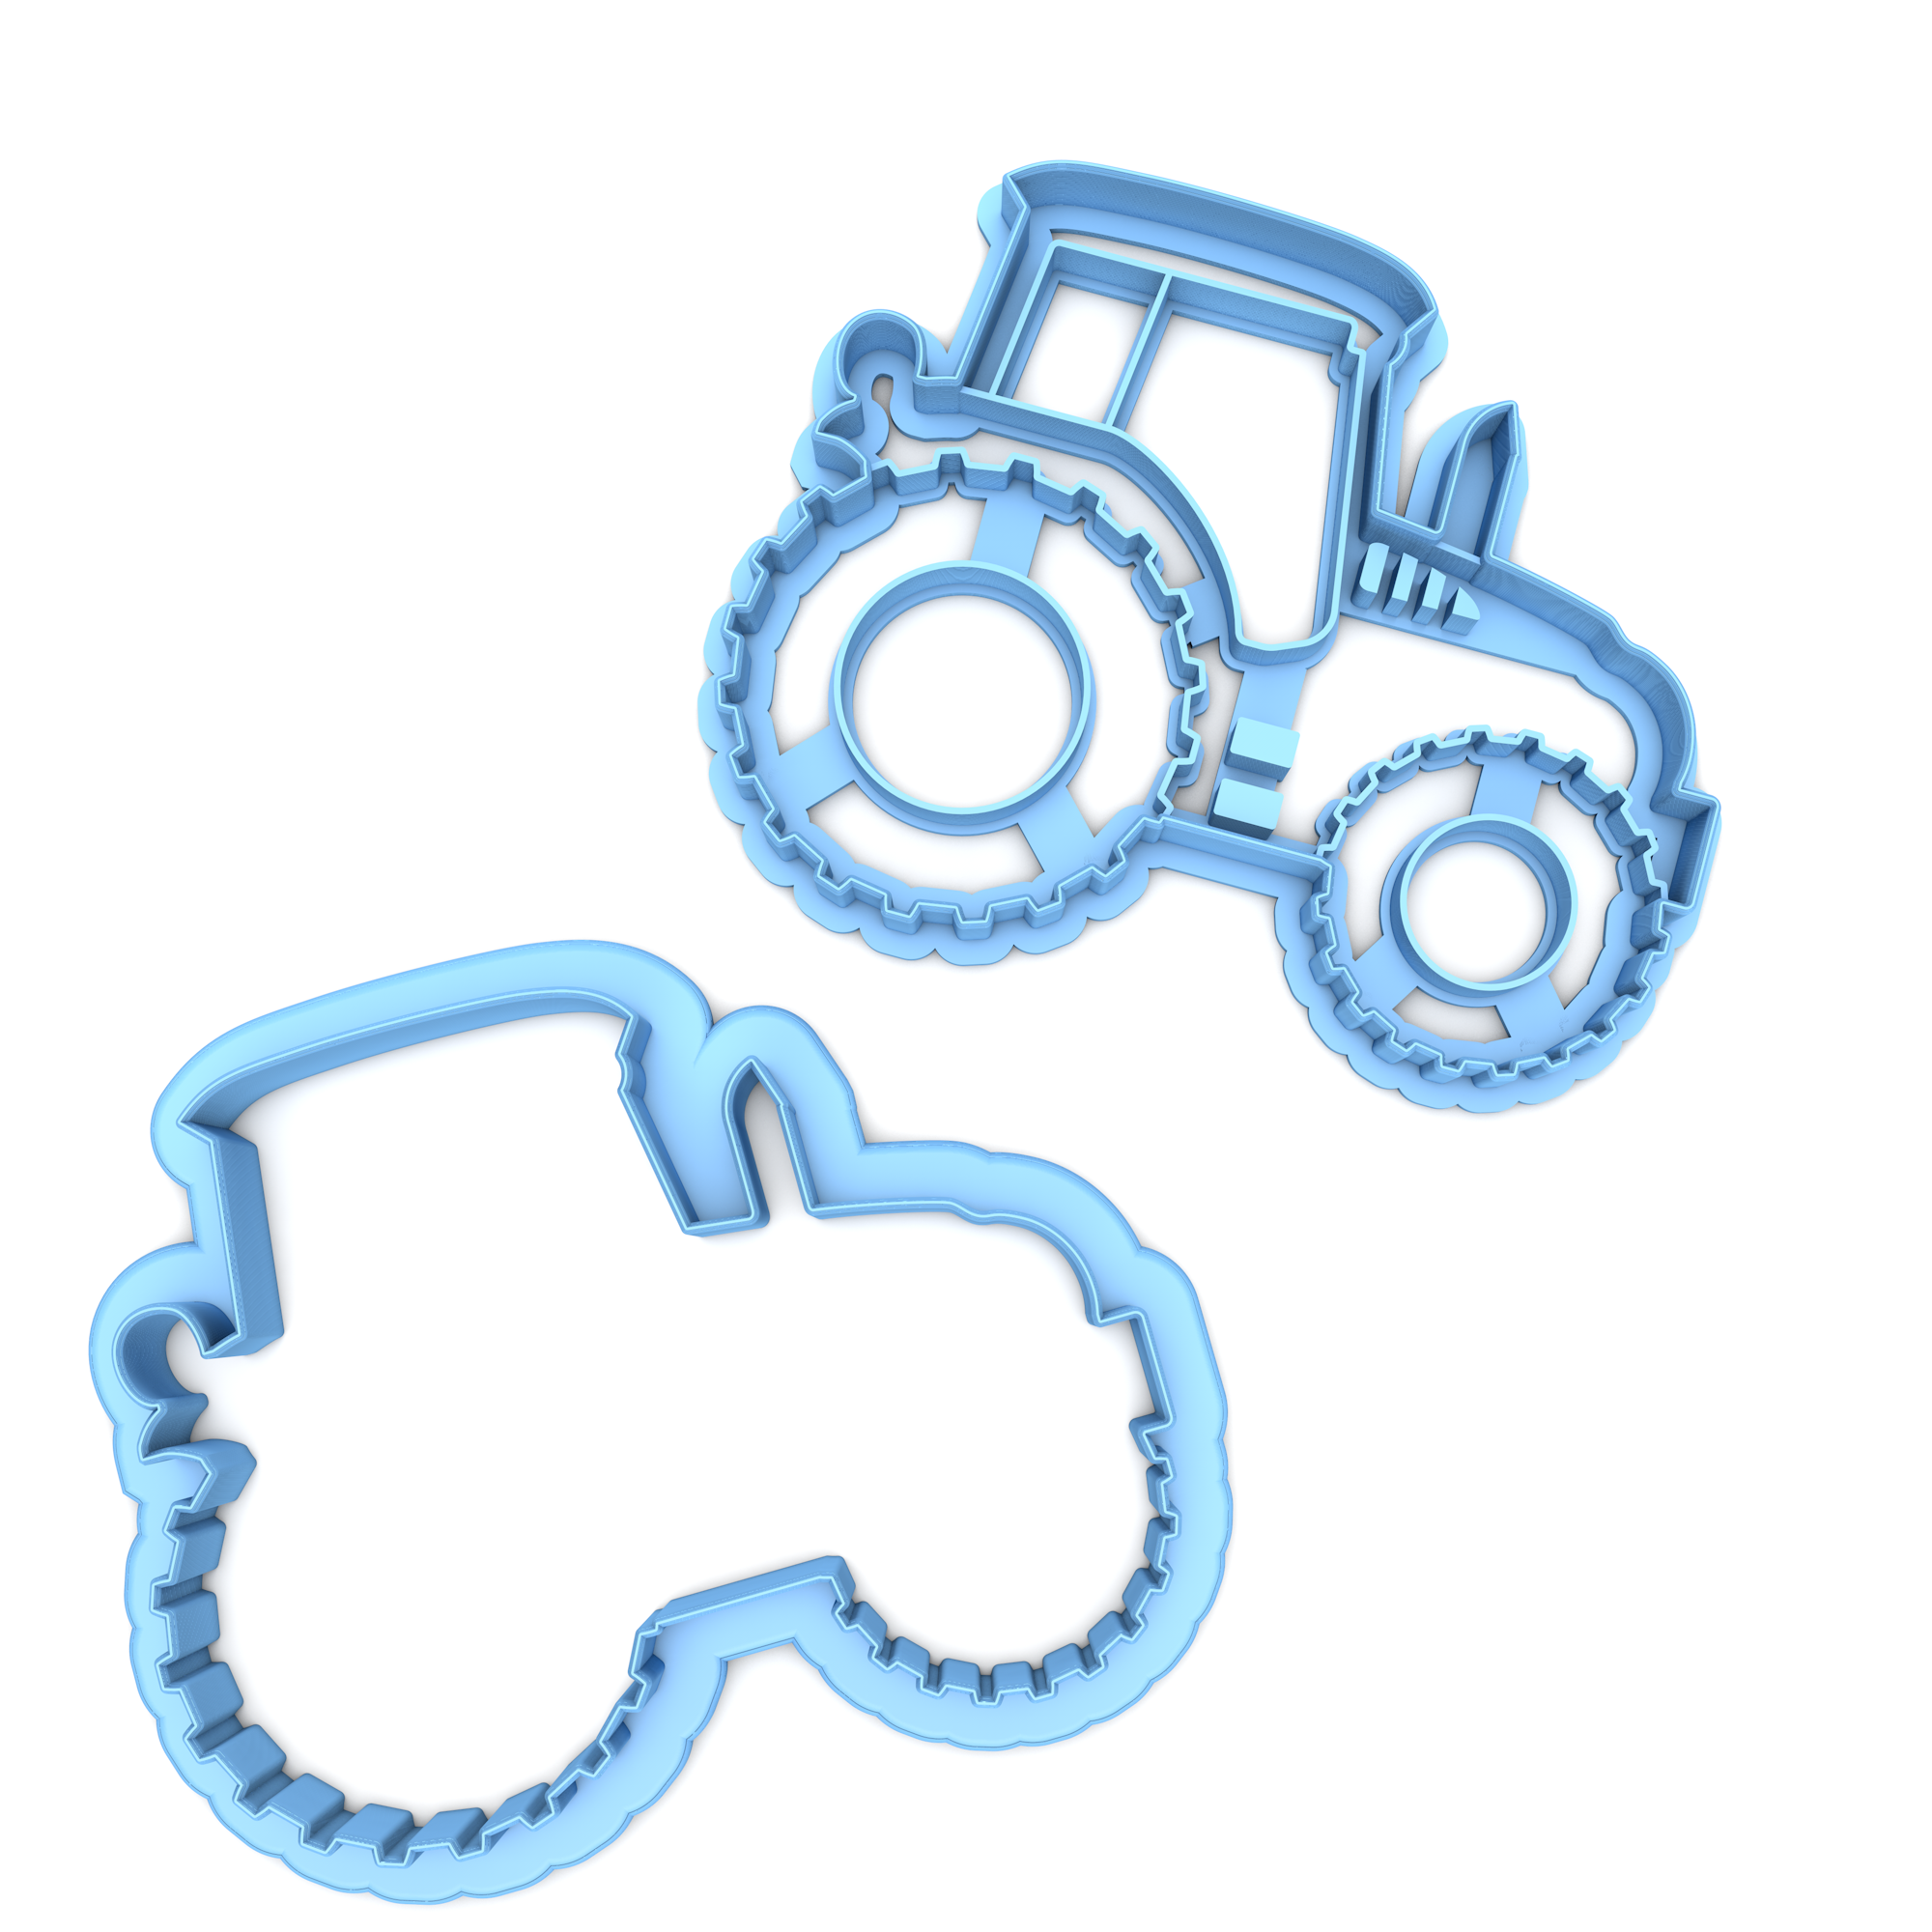 Set of 2 Modern Tractor Cookie Cutters/Dishwasher Safe